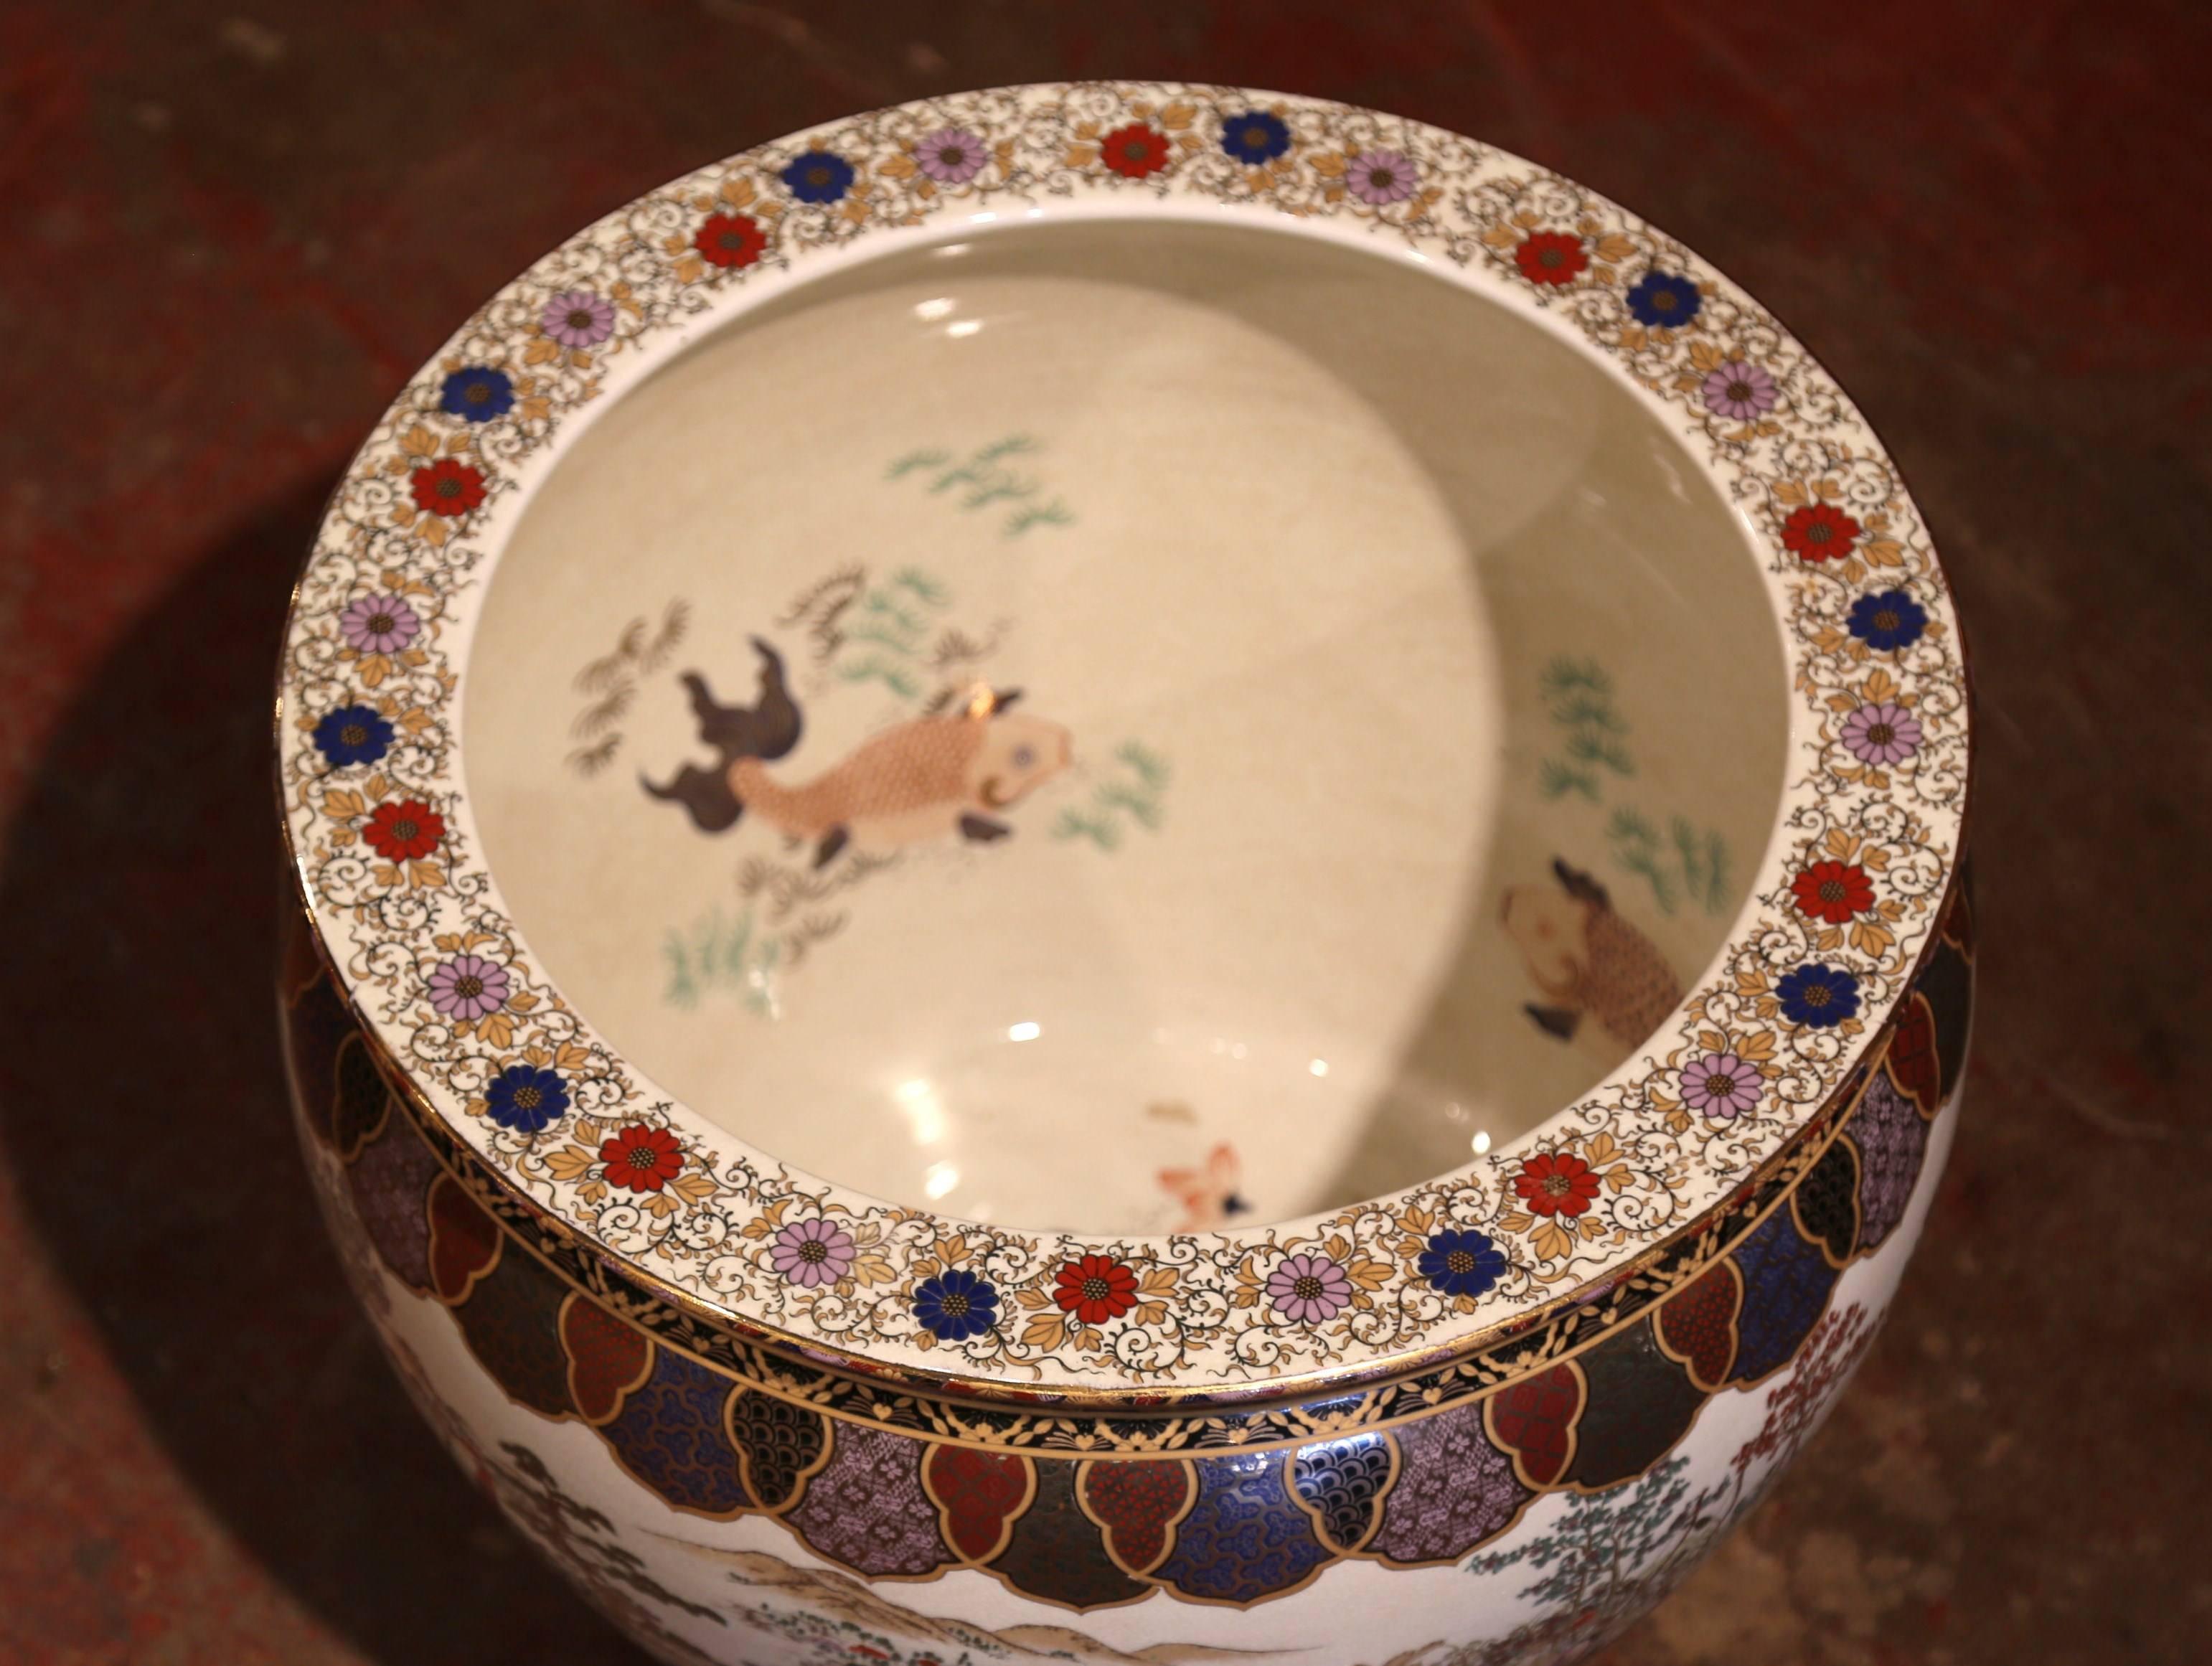 Gilt Large Porcelain Chinese Fishbowl Planter with Classic Oriental Decorations